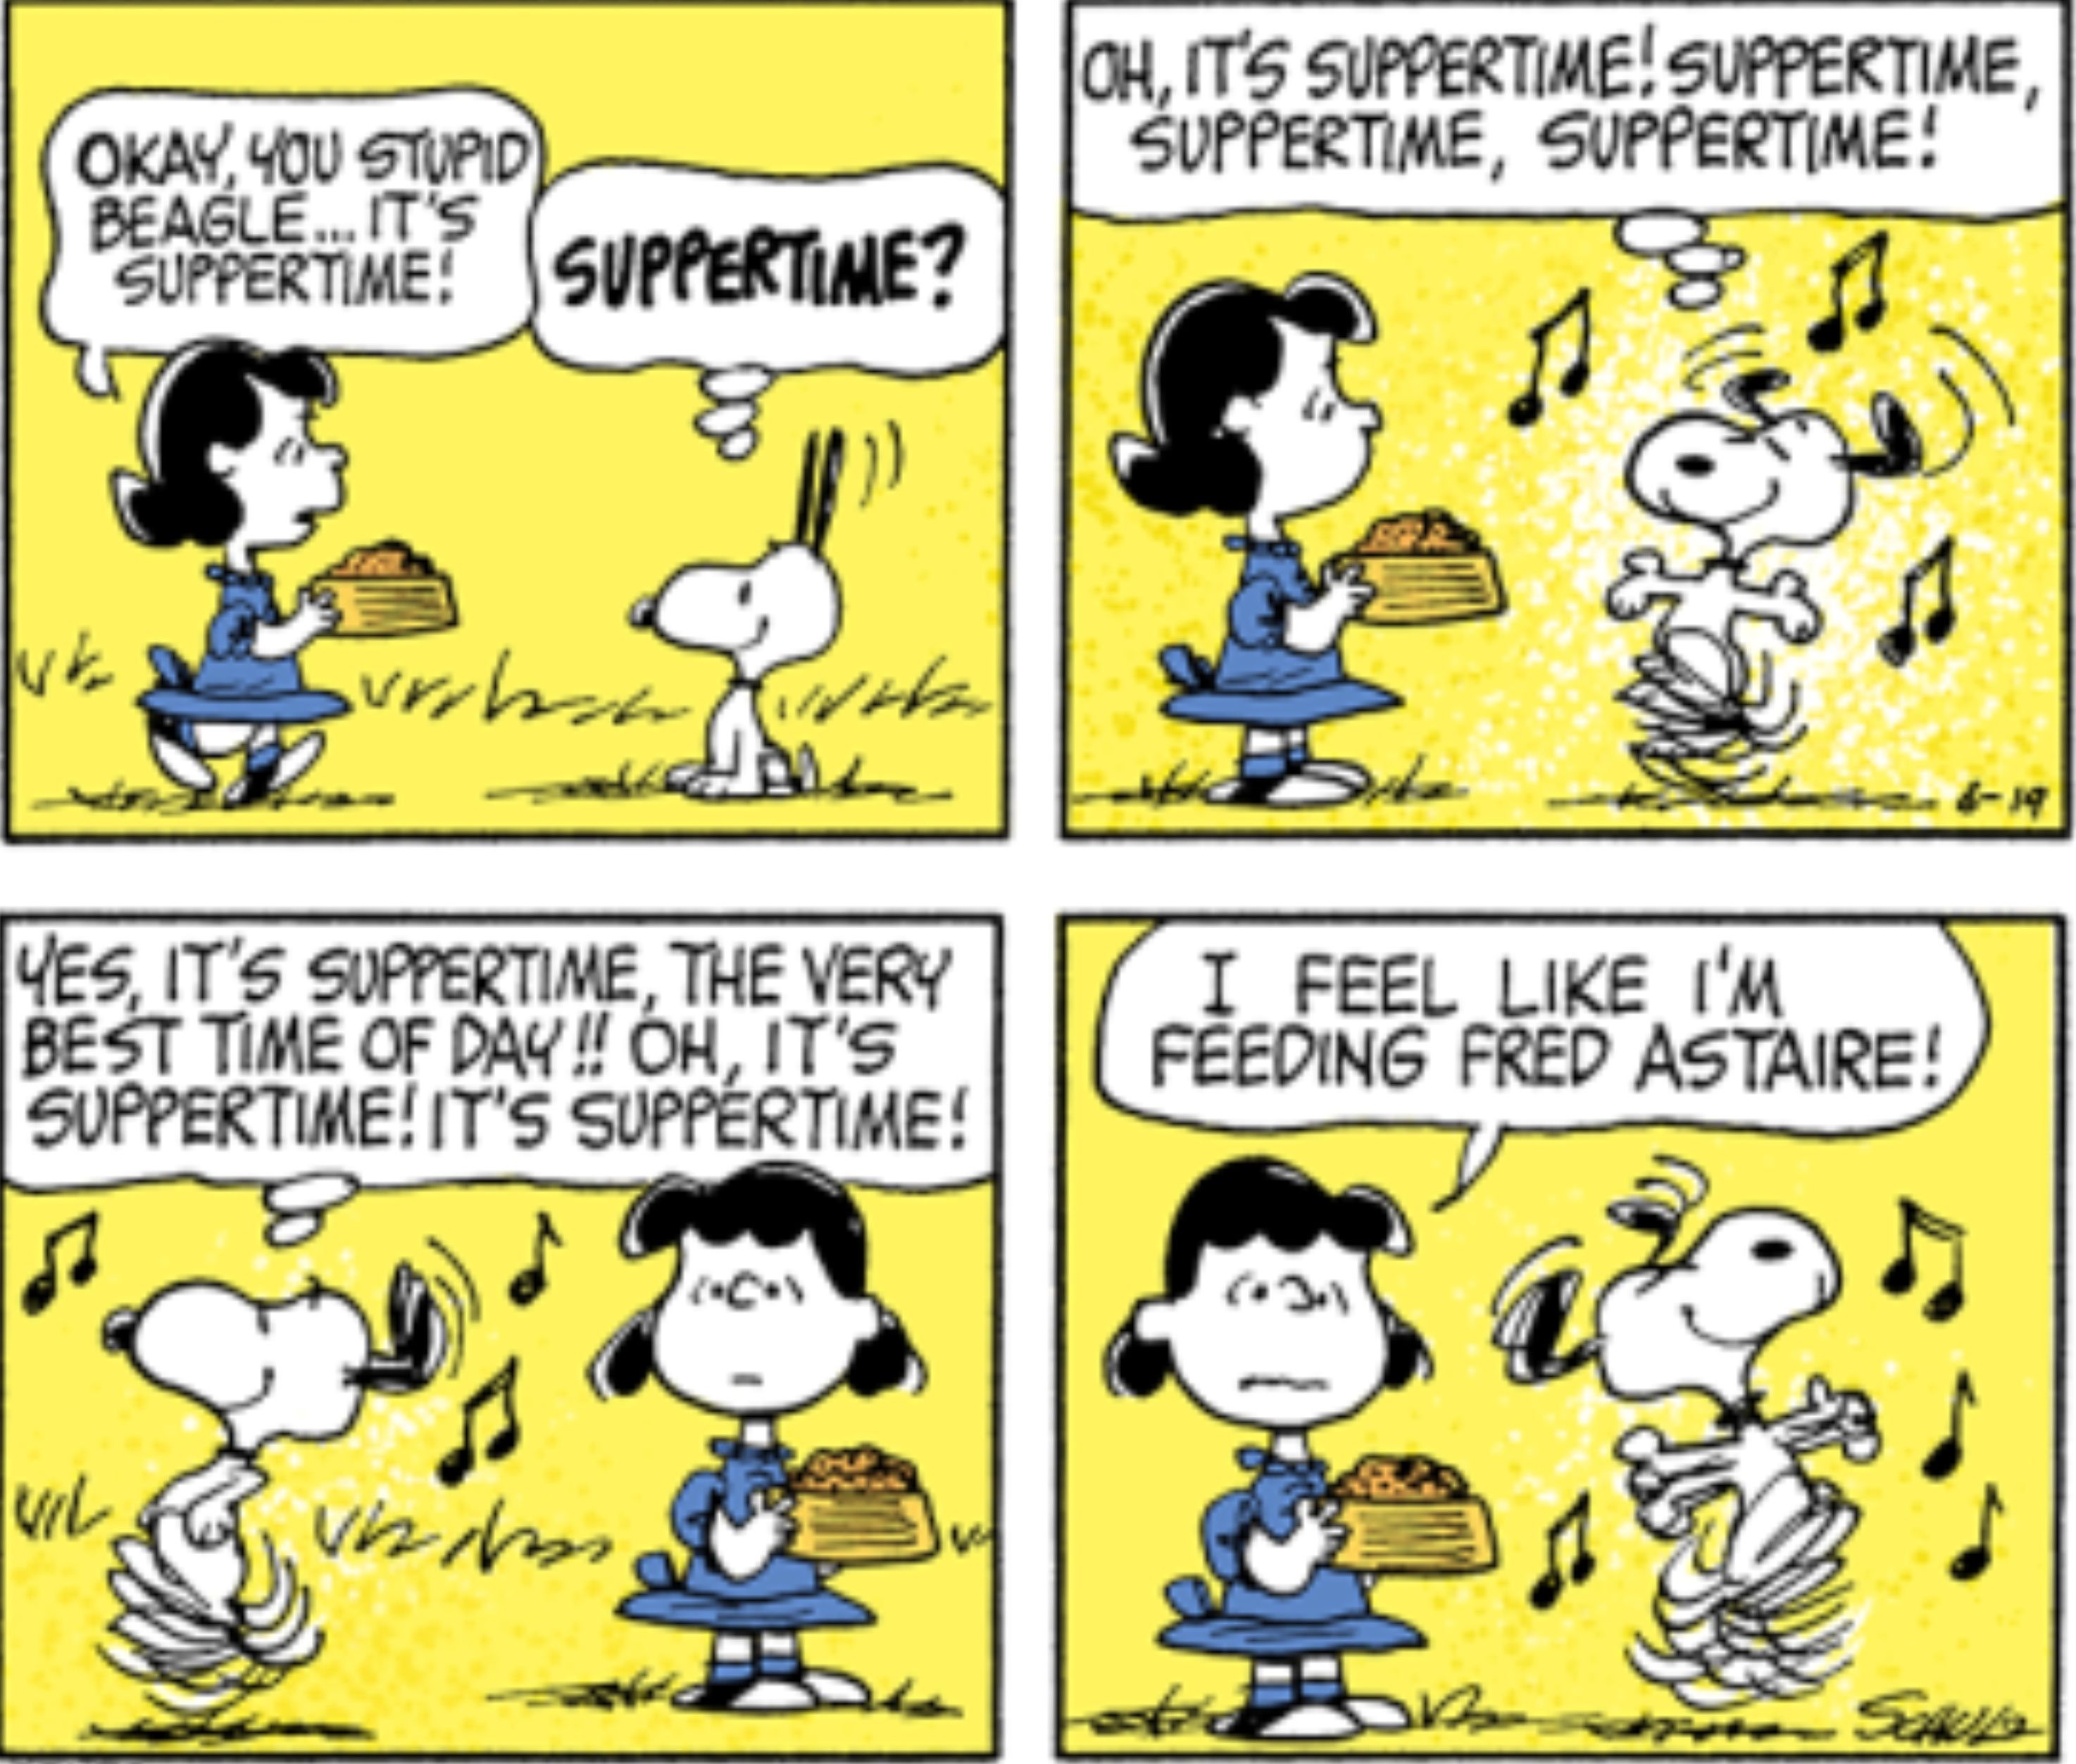 Snoopy dancing like Fred Astaire in Peanuts.